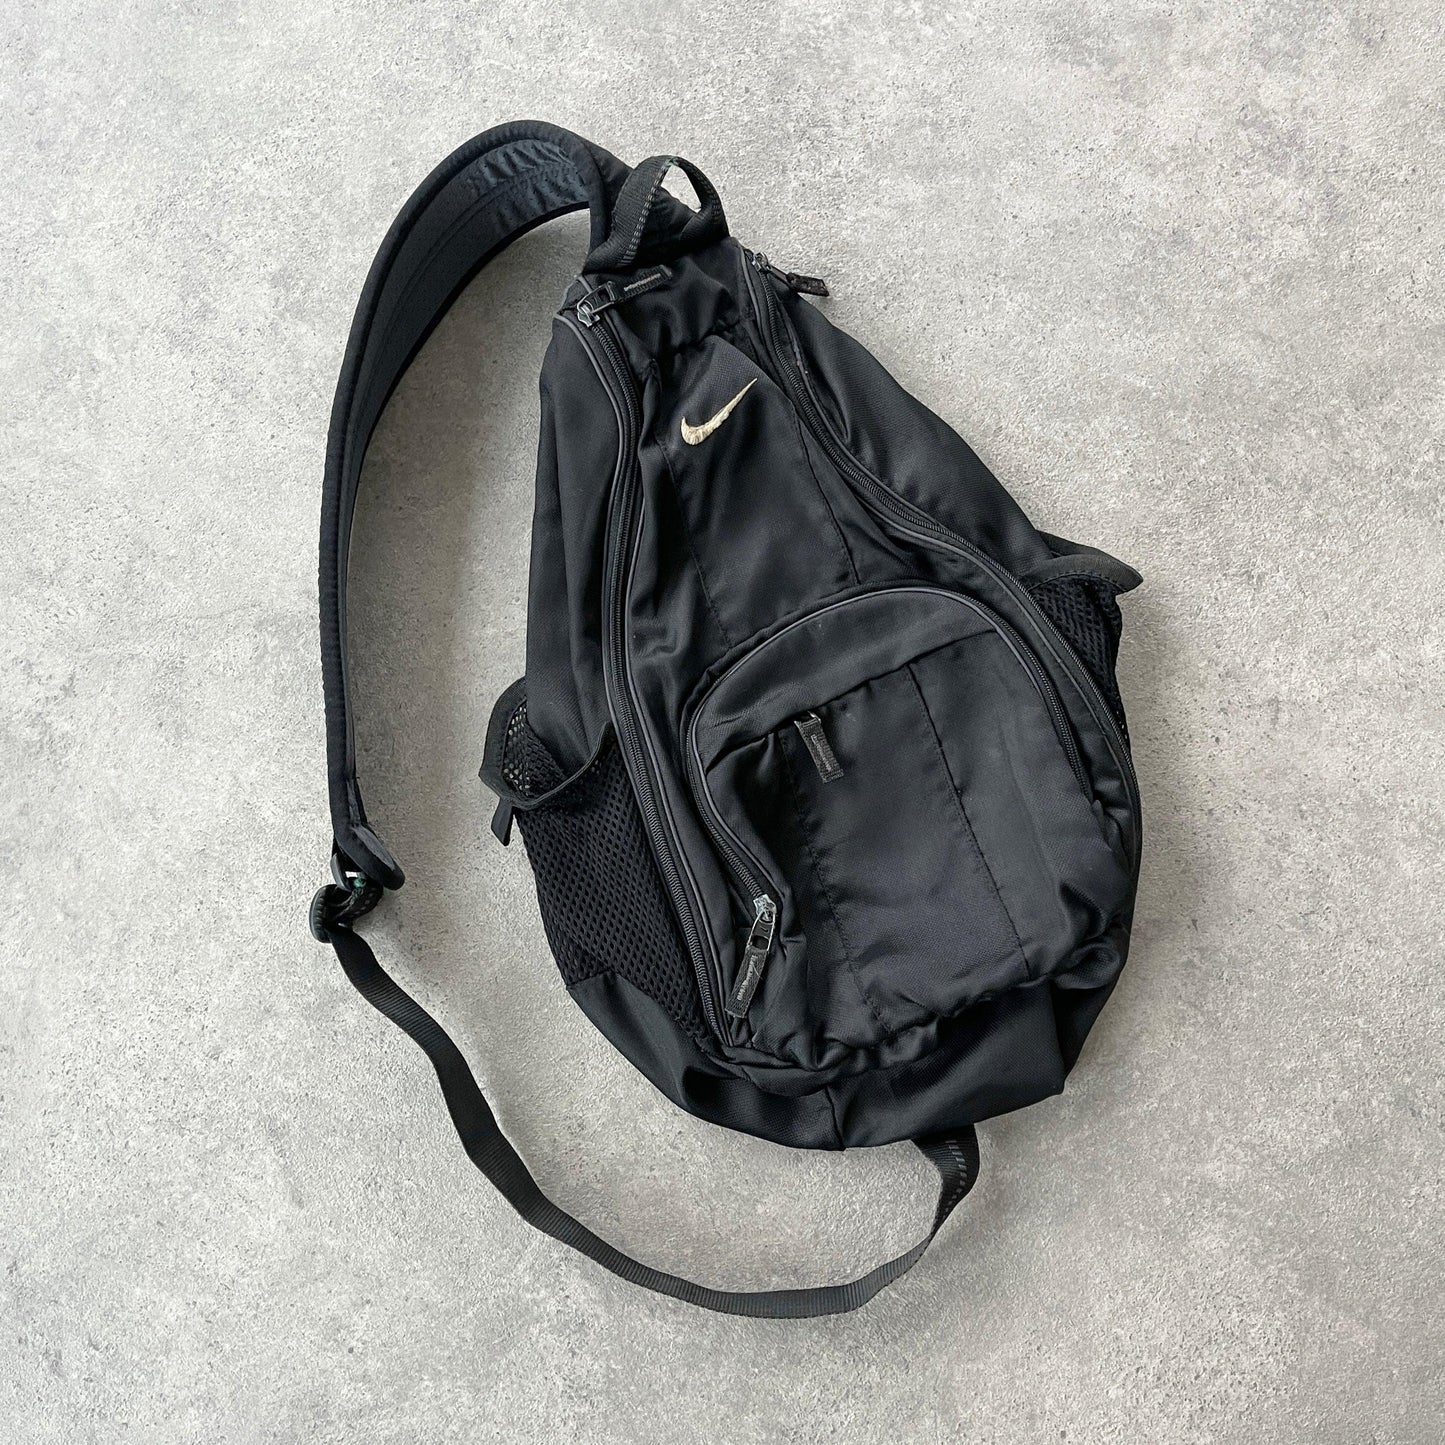 Nike 1990s technical tri-harness sling bag (21”x14”x7”) - Known Source